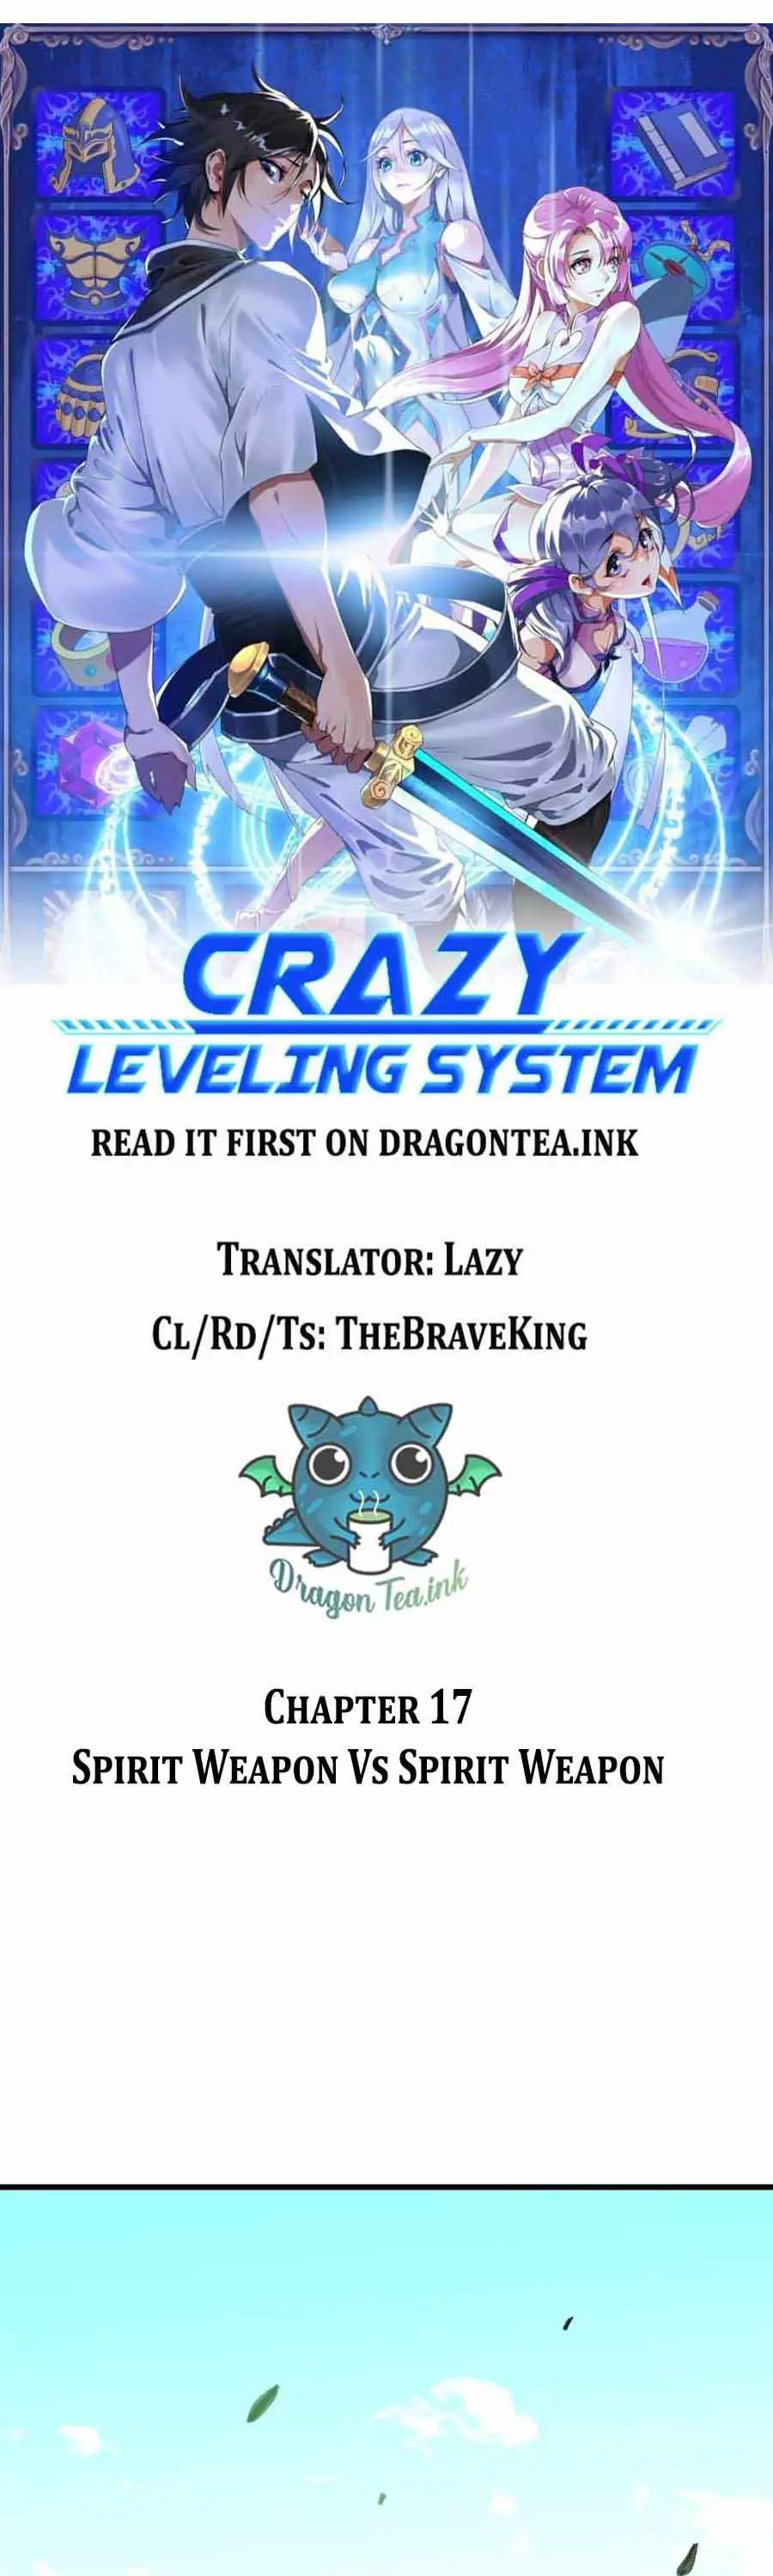 Crazy Leveling System - 17 page 8-0862c881